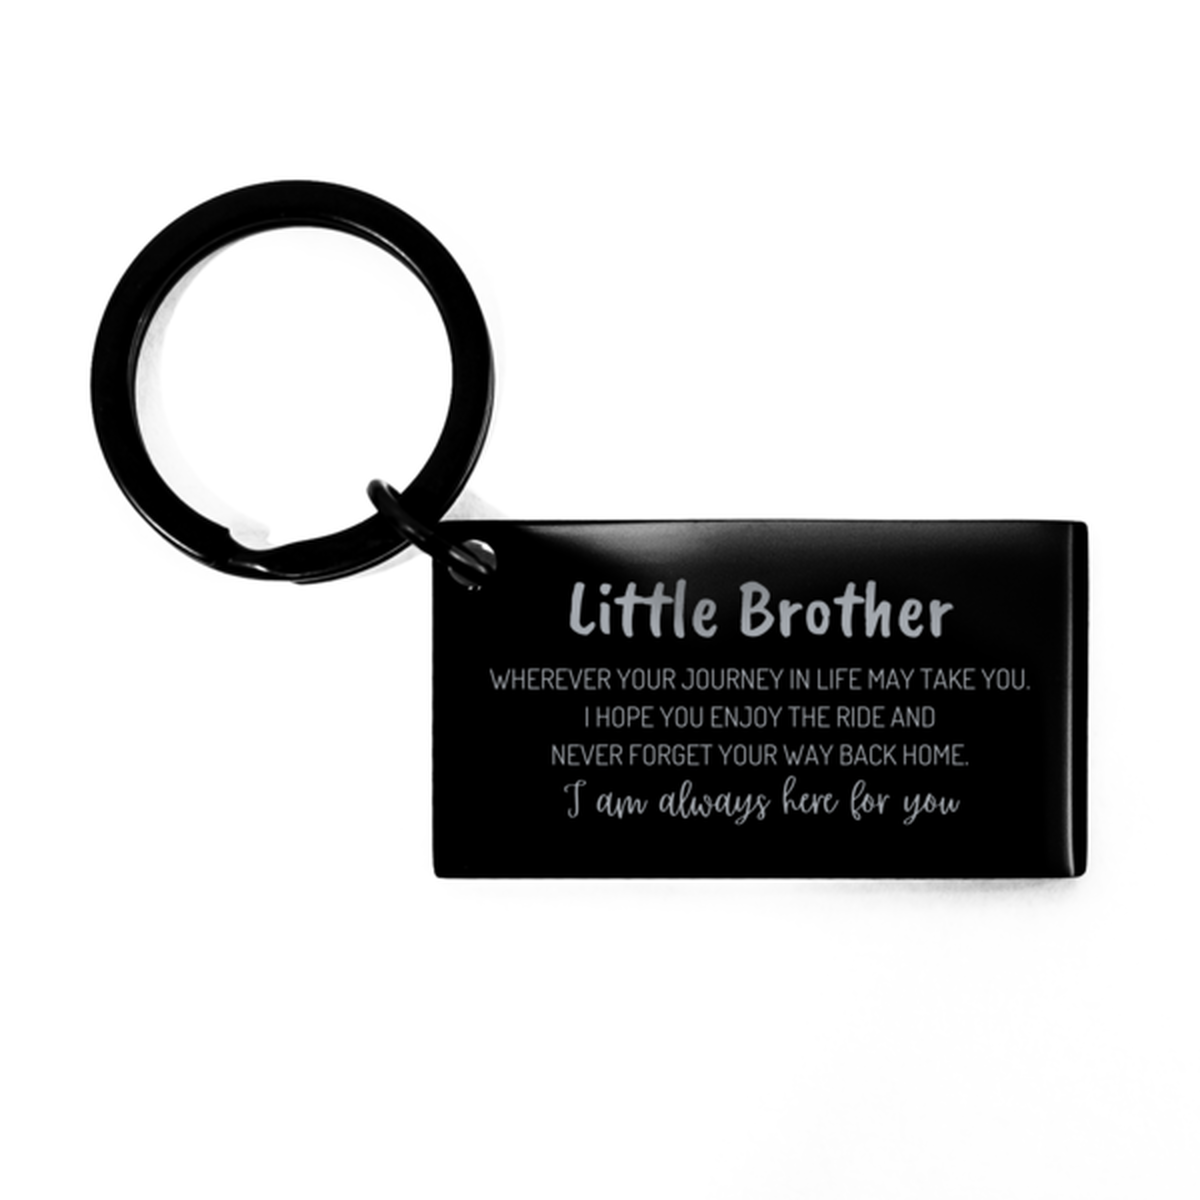 Little Brother wherever your journey in life may take you, I am always here for you Little Brother Keychain, Awesome Christmas Gifts For Little Brother, Little Brother Birthday Gifts for Men Women Family Loved One